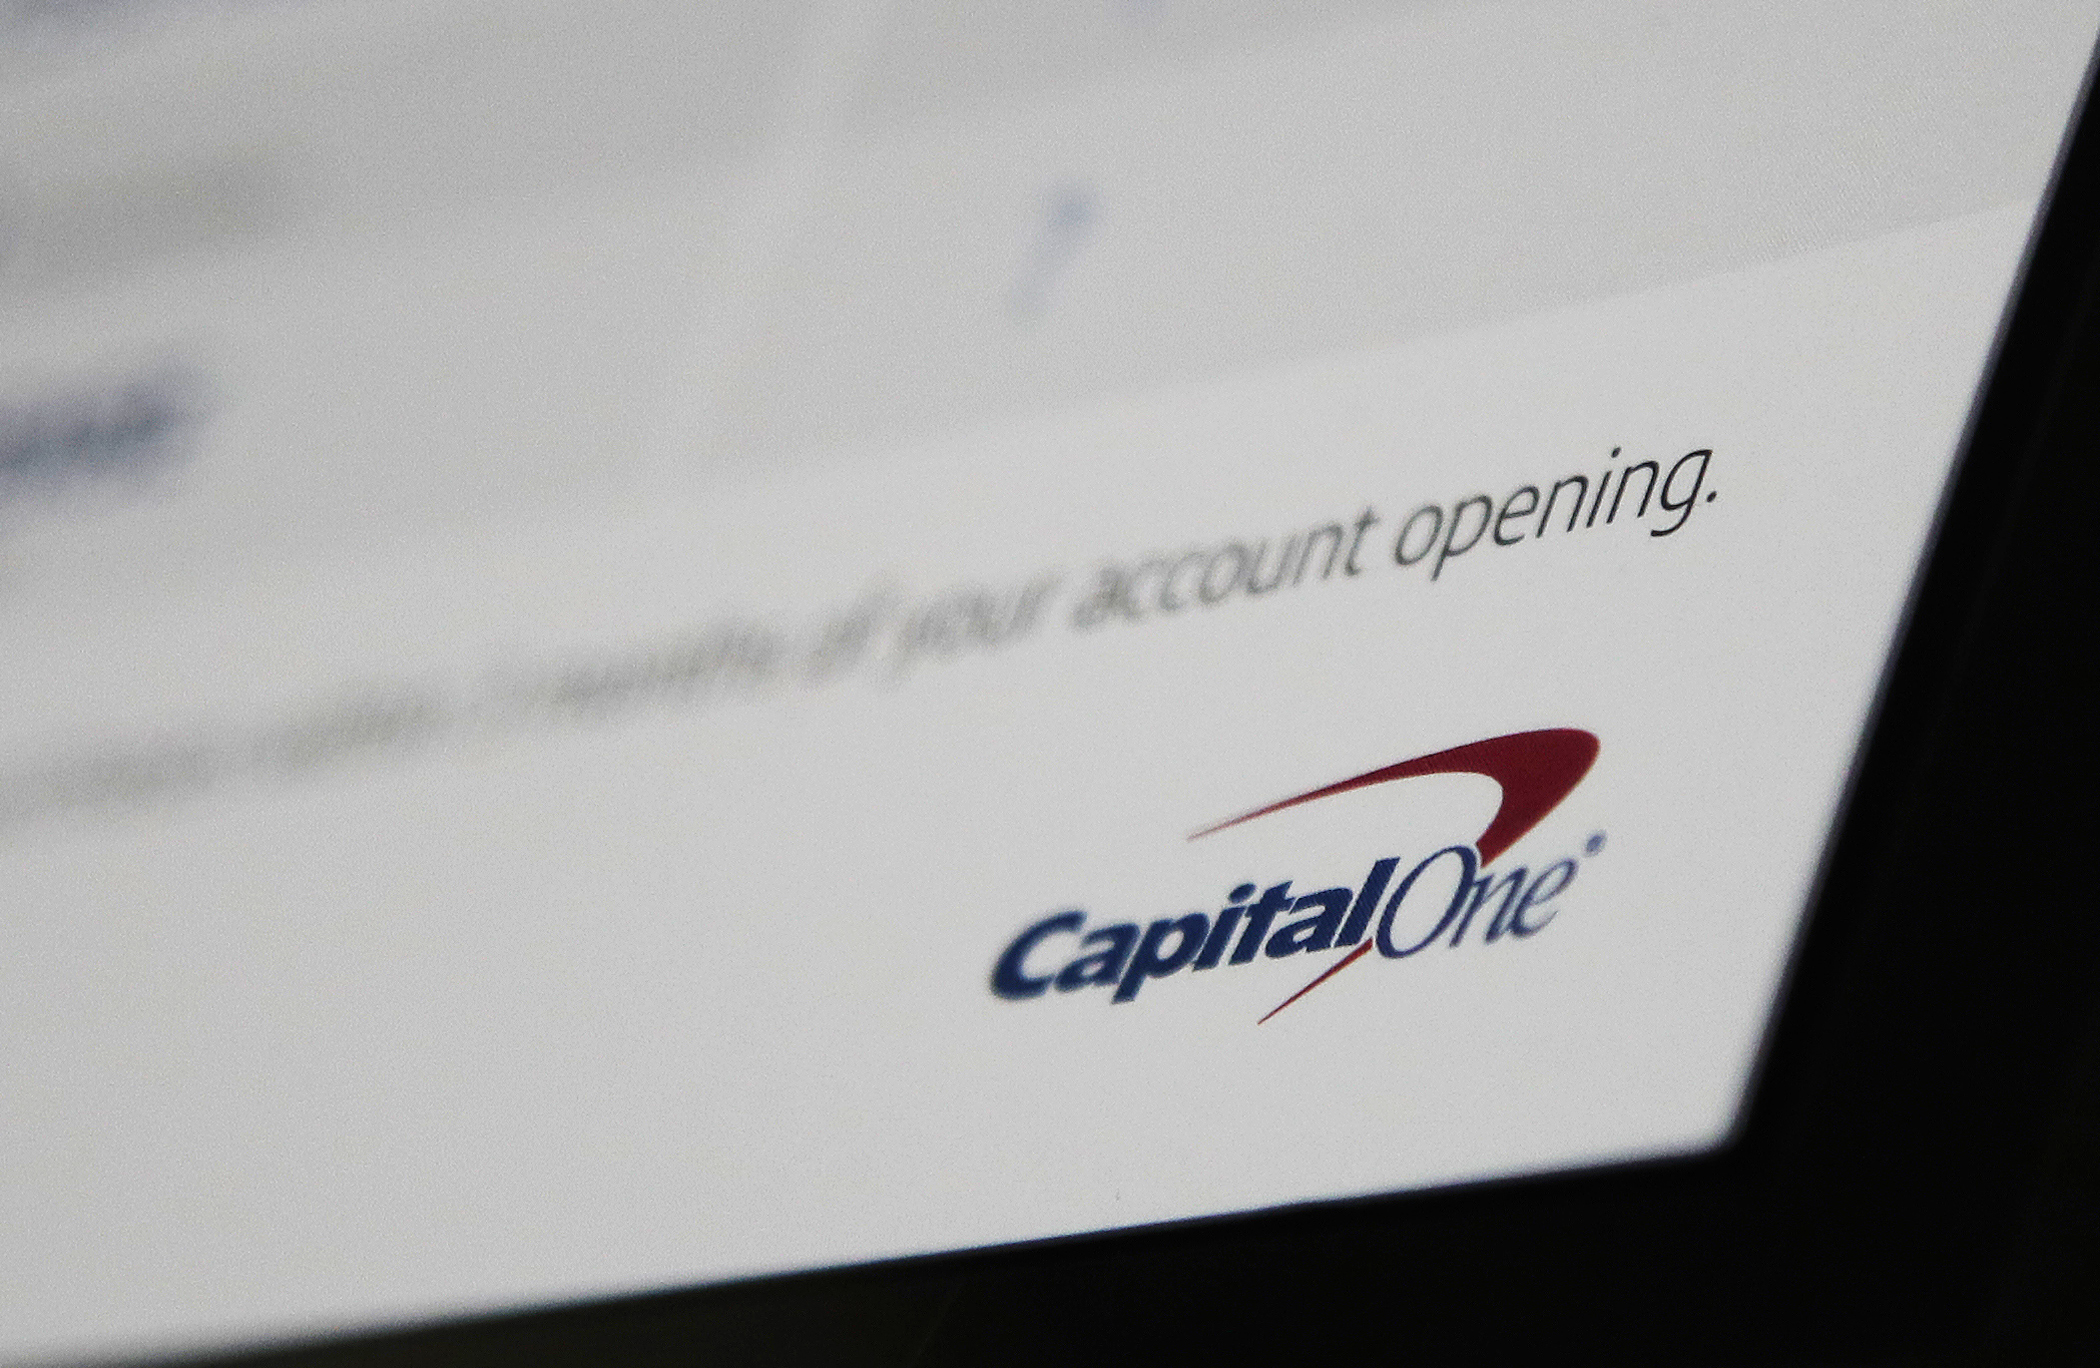 PHOTO: This Monday, July 22, 2019, photo shows Capital One mailing in North Andover, Mass. Capital One says a hacker got access to the personal information of over 100 million individuals applying for credit. (AP Photo/Elise Amendola)